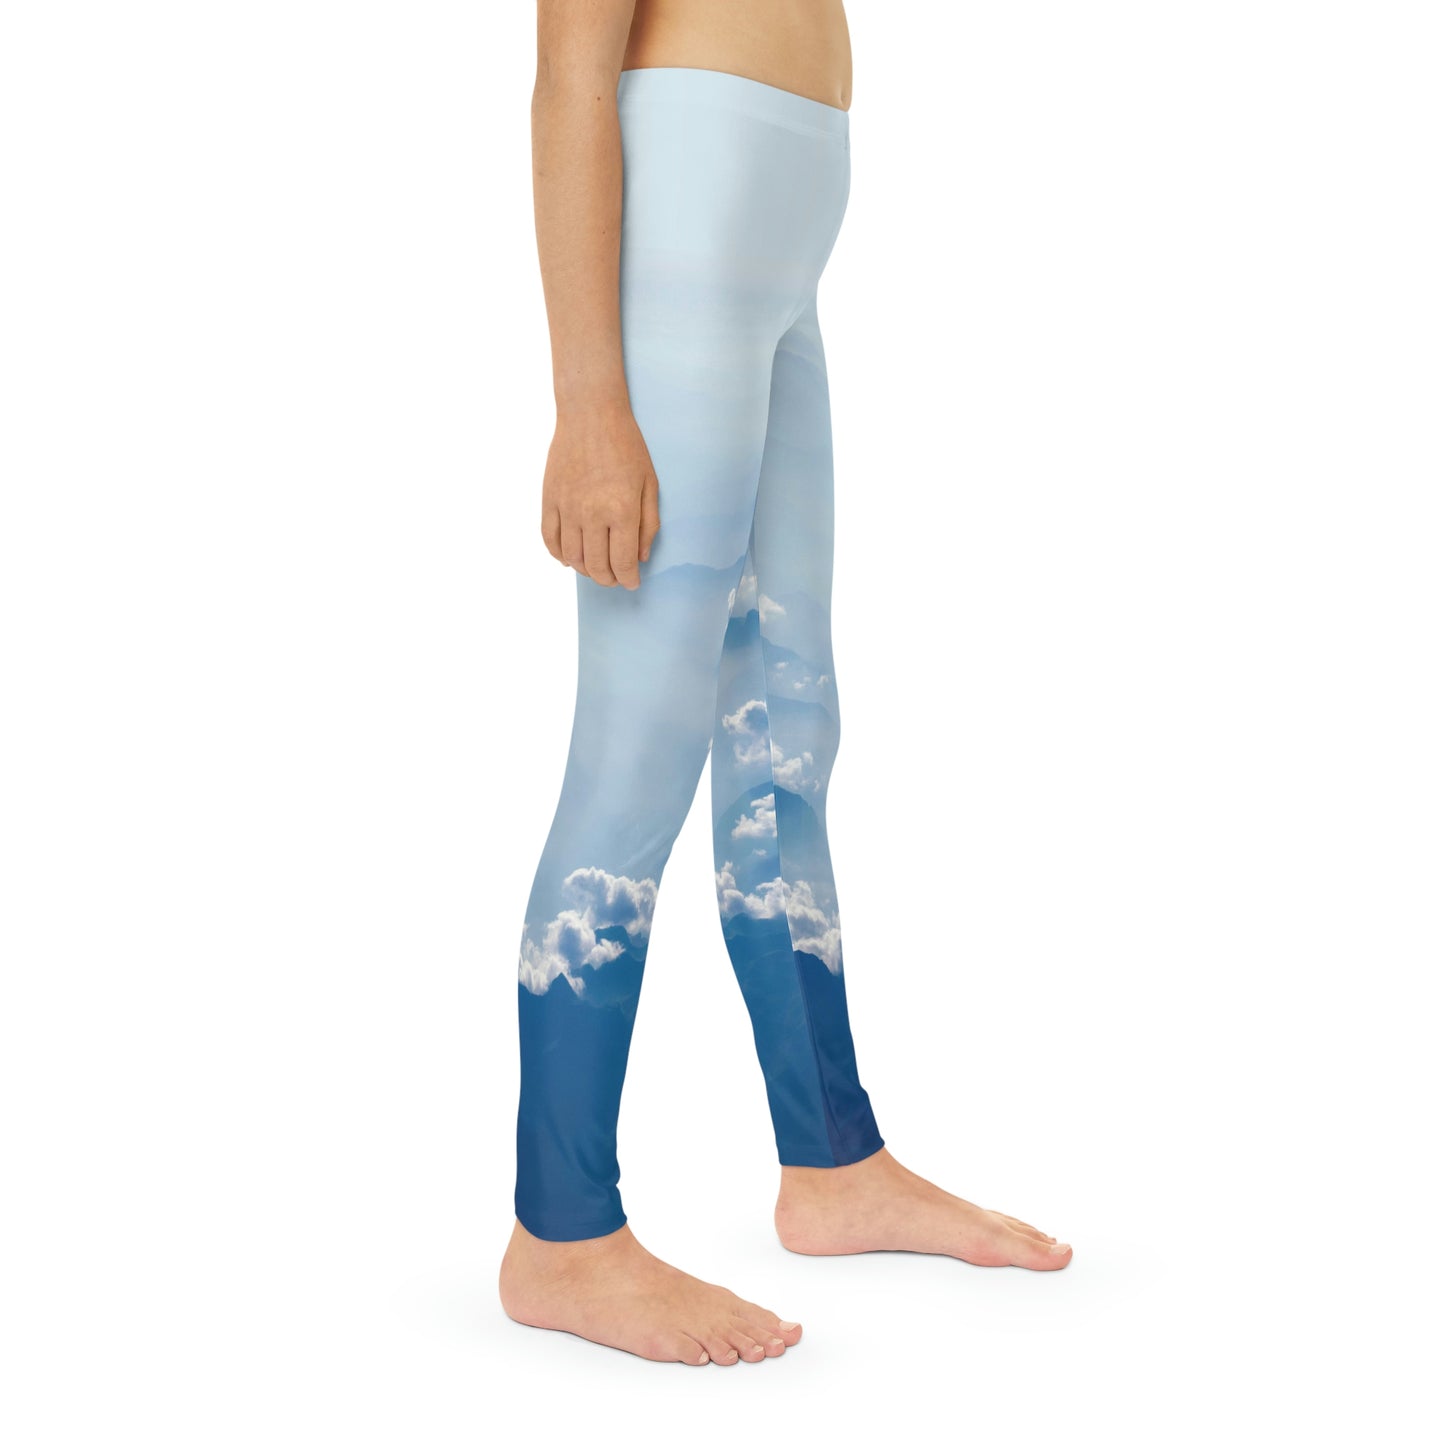 Cloudy Sky Youth Full-Length Leggings, Cloud Yoga Leggings, Clouds Print Leggings, High Waisted, Crossover Leggings,Soft Blue Stretch Pants with Clouds, Chic Boho Activewear ,Dance Fitness and Athleisure